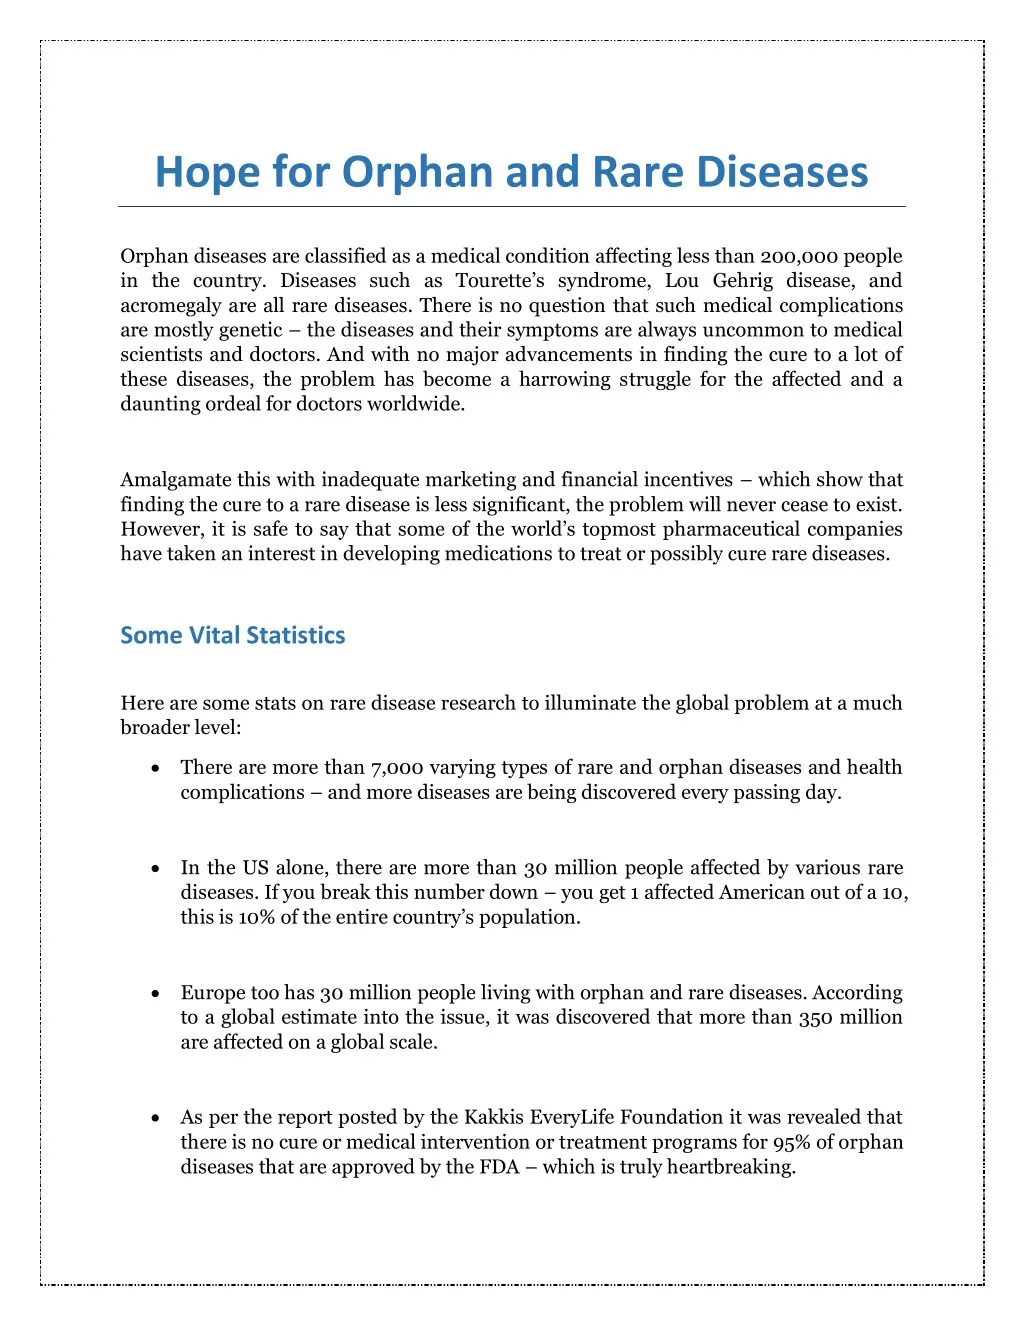 hope for orphan and rare diseases